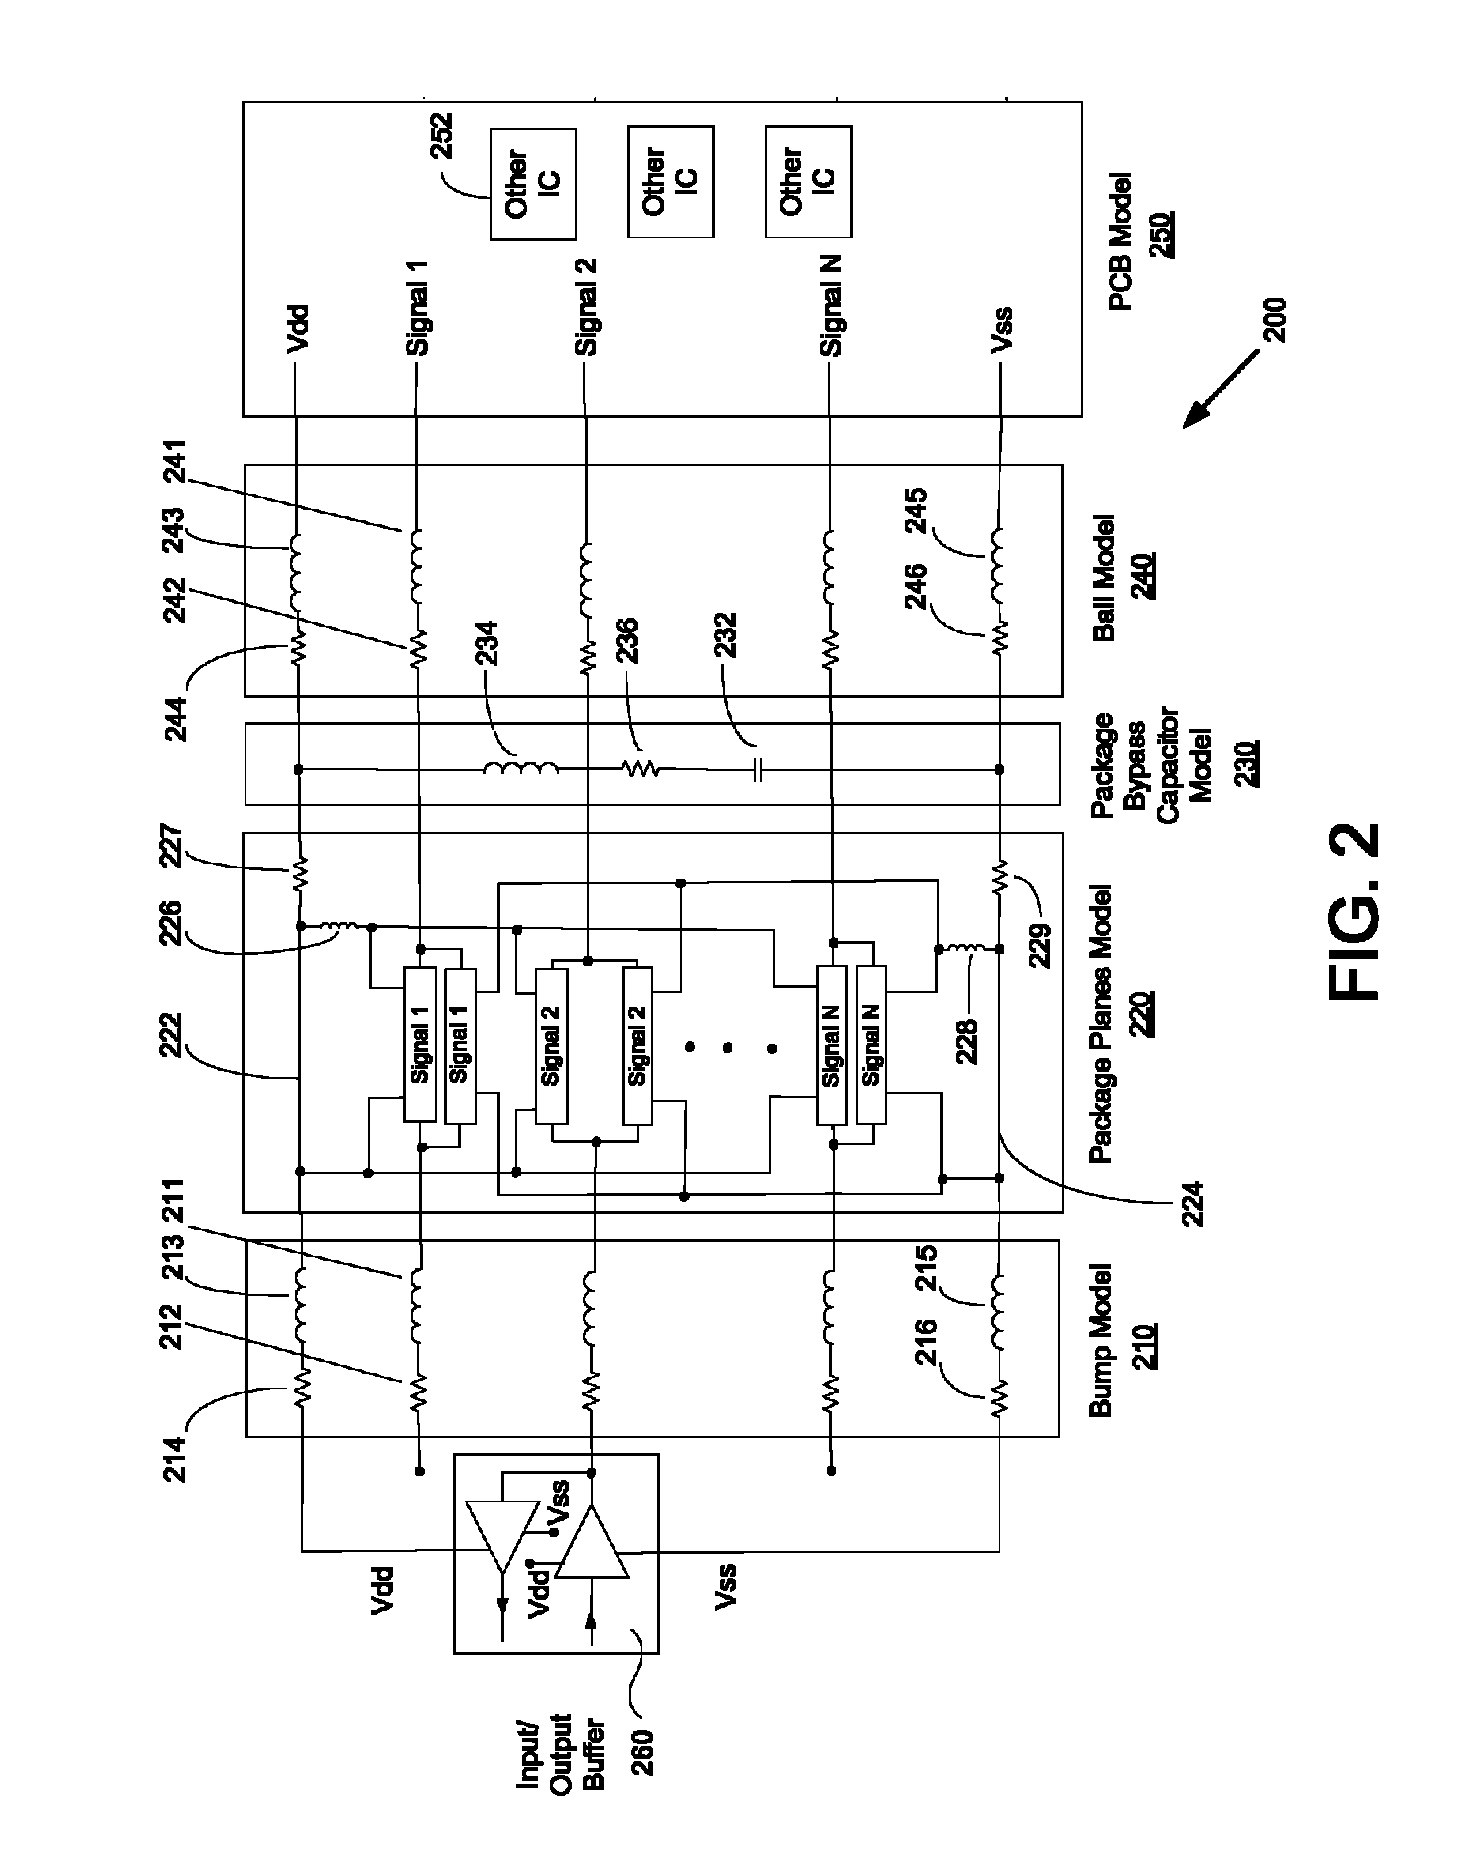 Integrated circuit package component and ball grid array simulation model